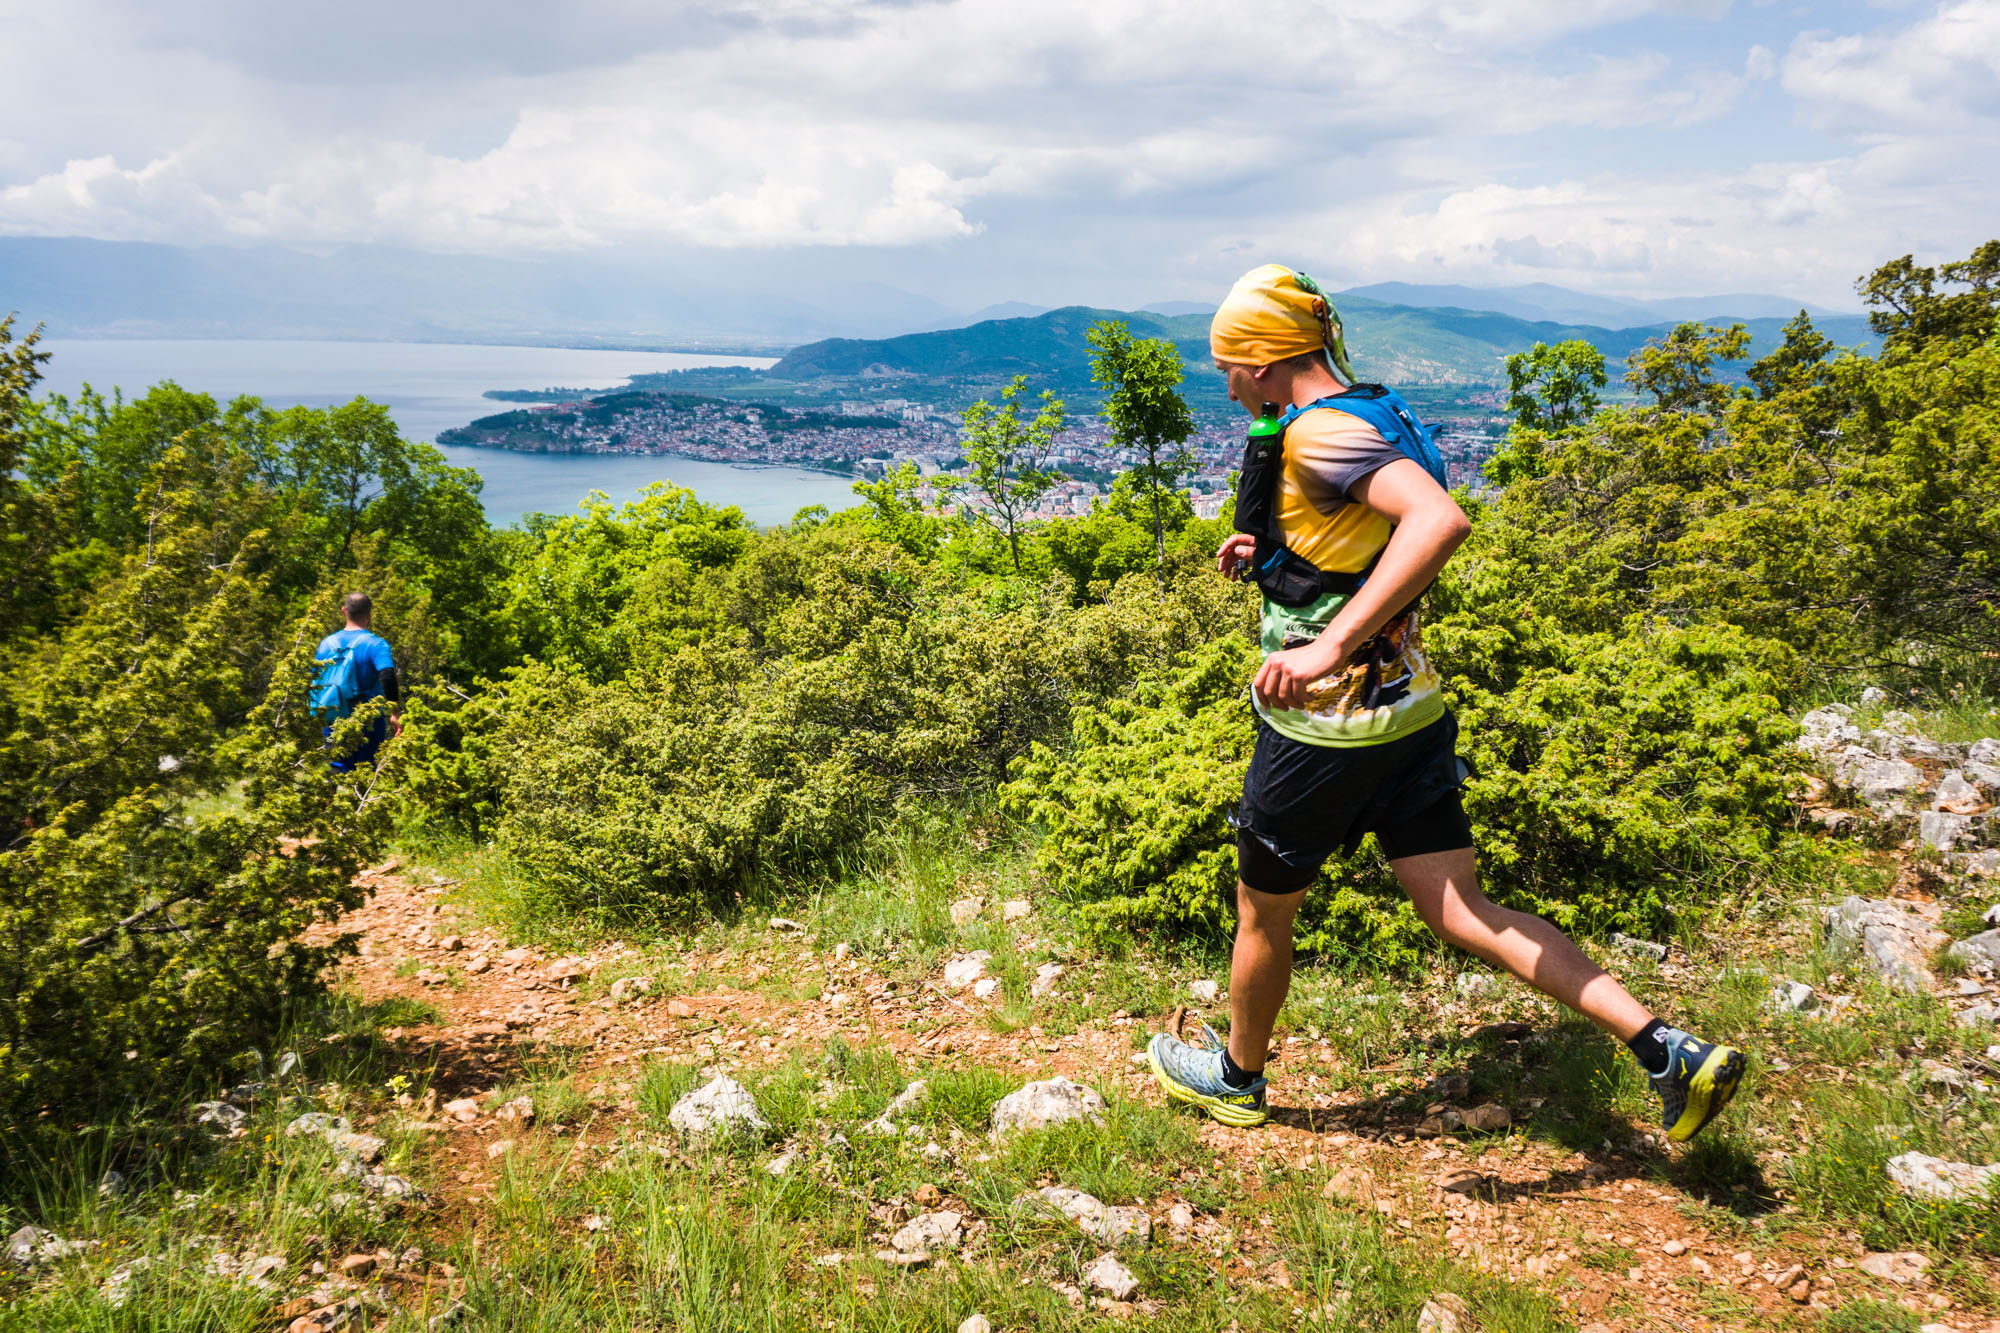 Letnica Trail descend with Trail runners running in the Galicica National Park towards Ohrid town